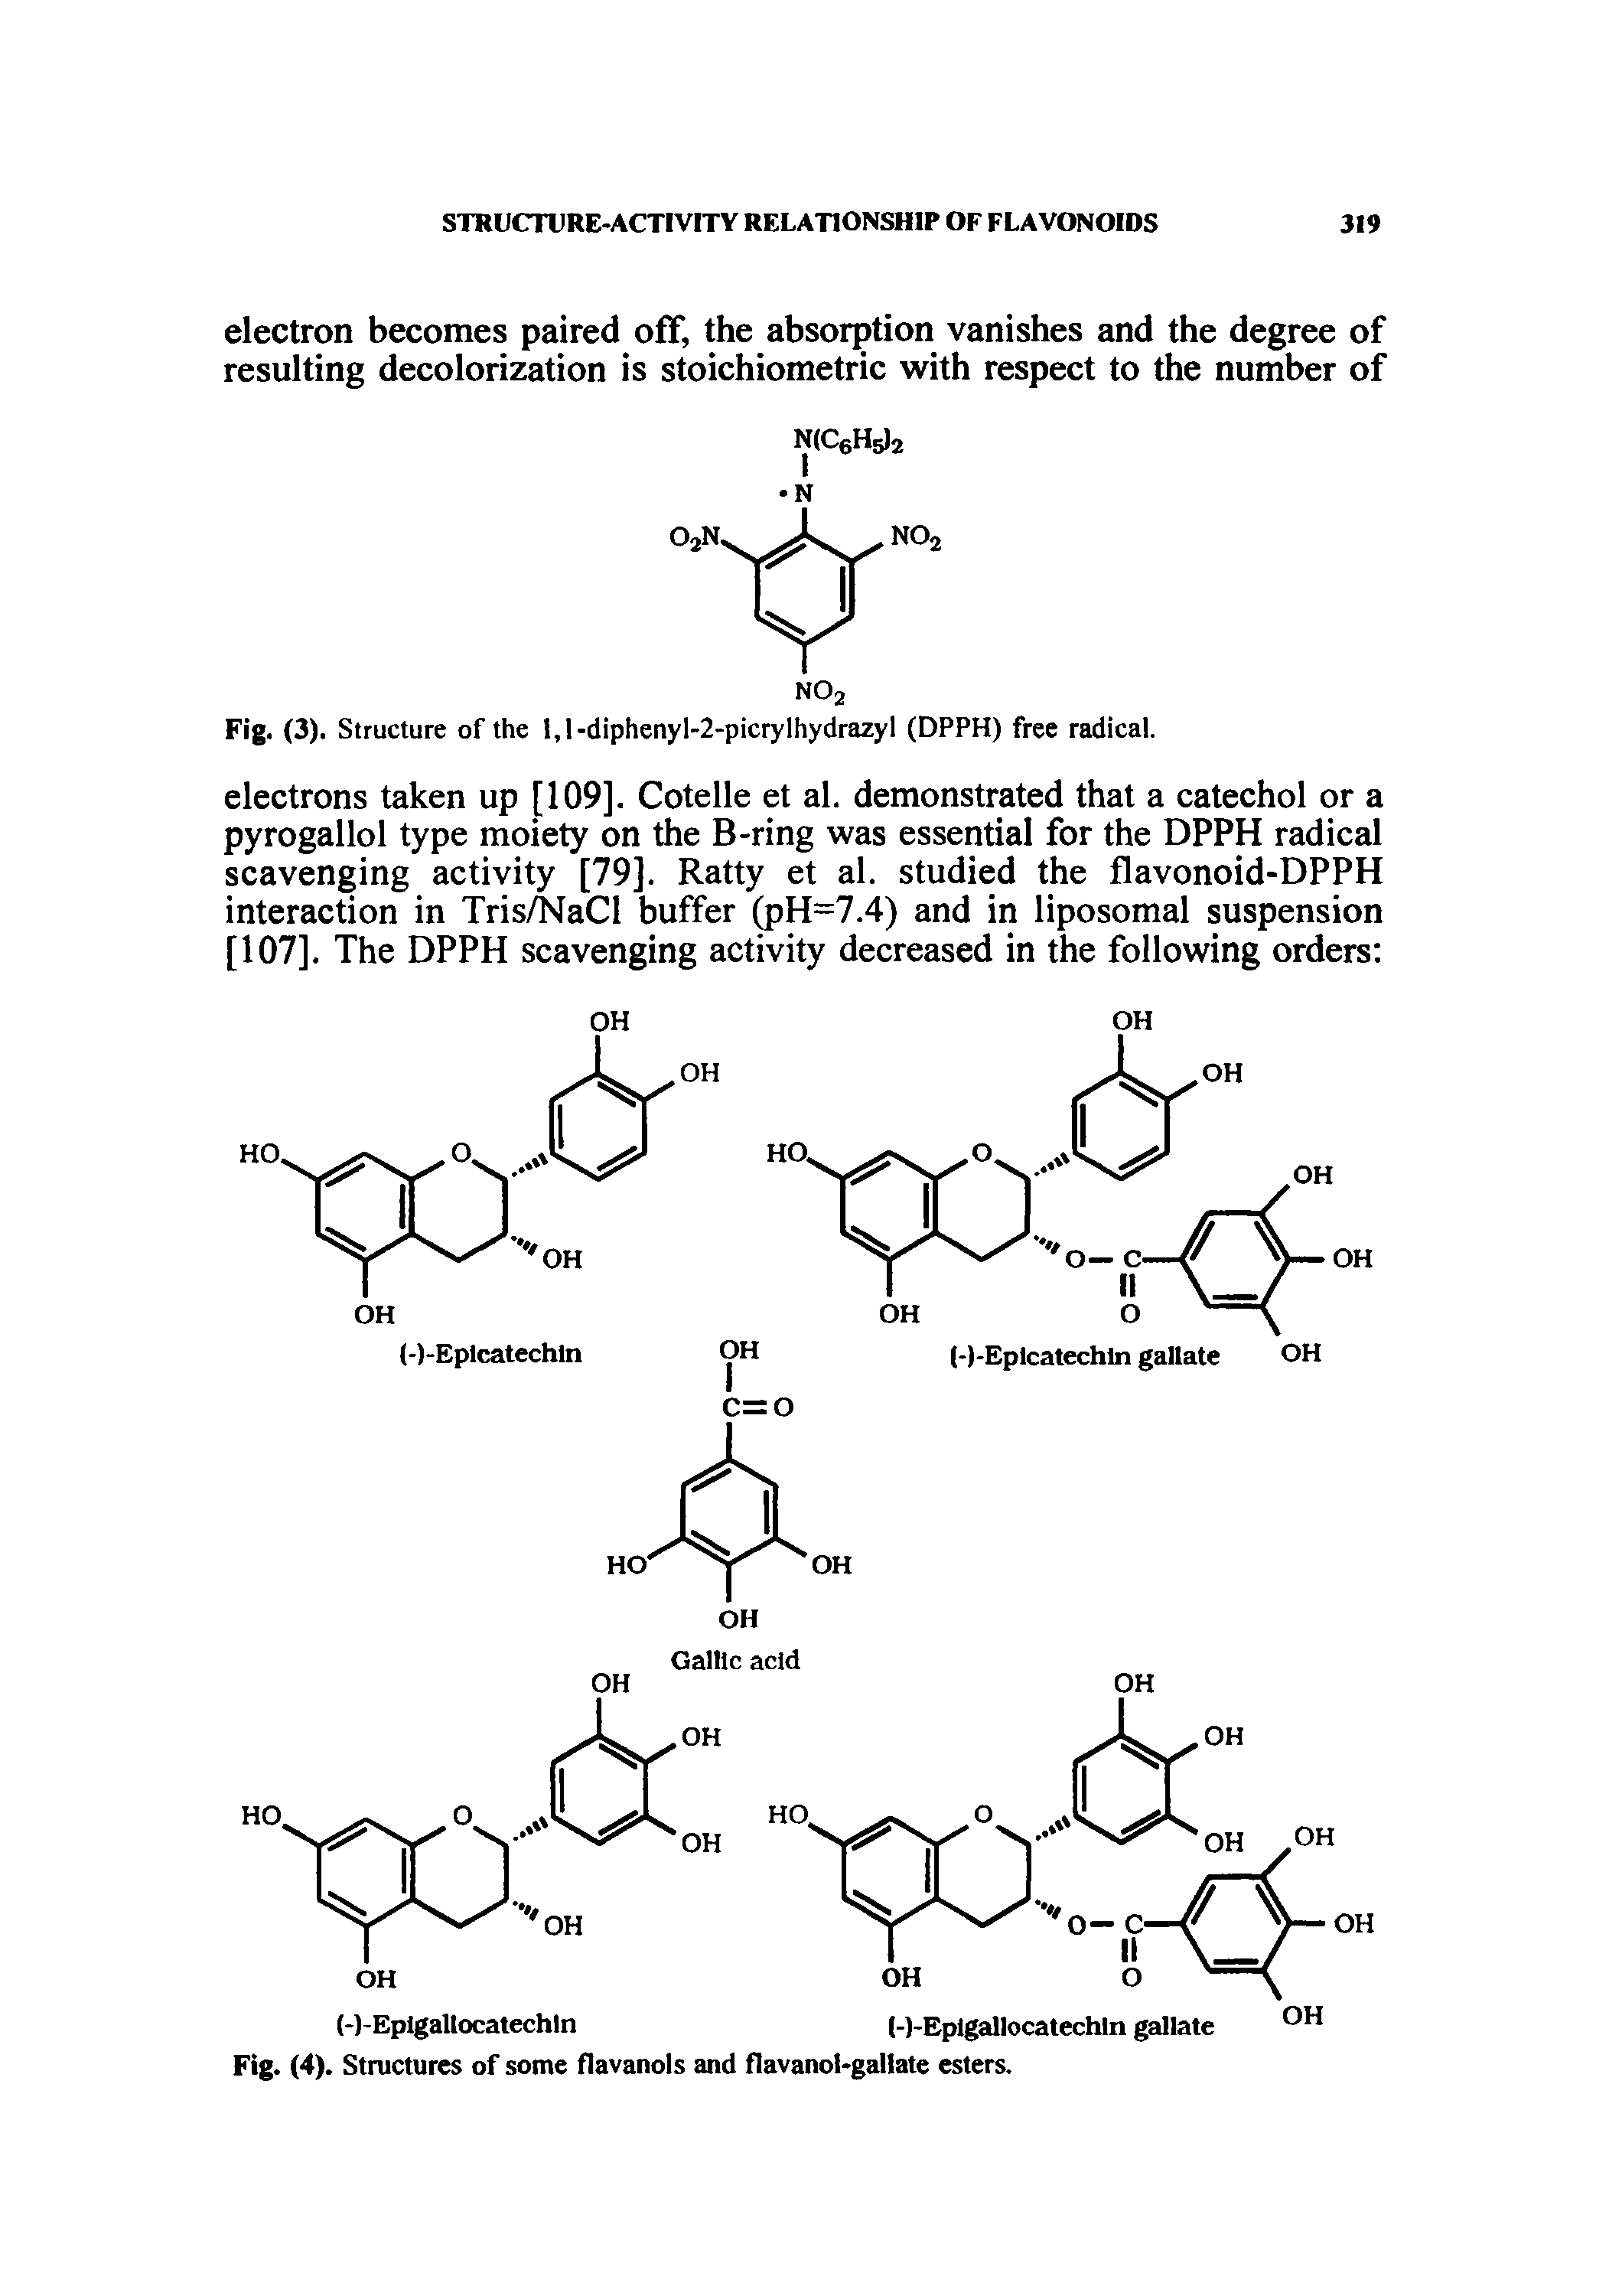 Fig. (3). Structure of the l,l-diphenyl-2-picrylhydrazyl (DPPH) free radical.